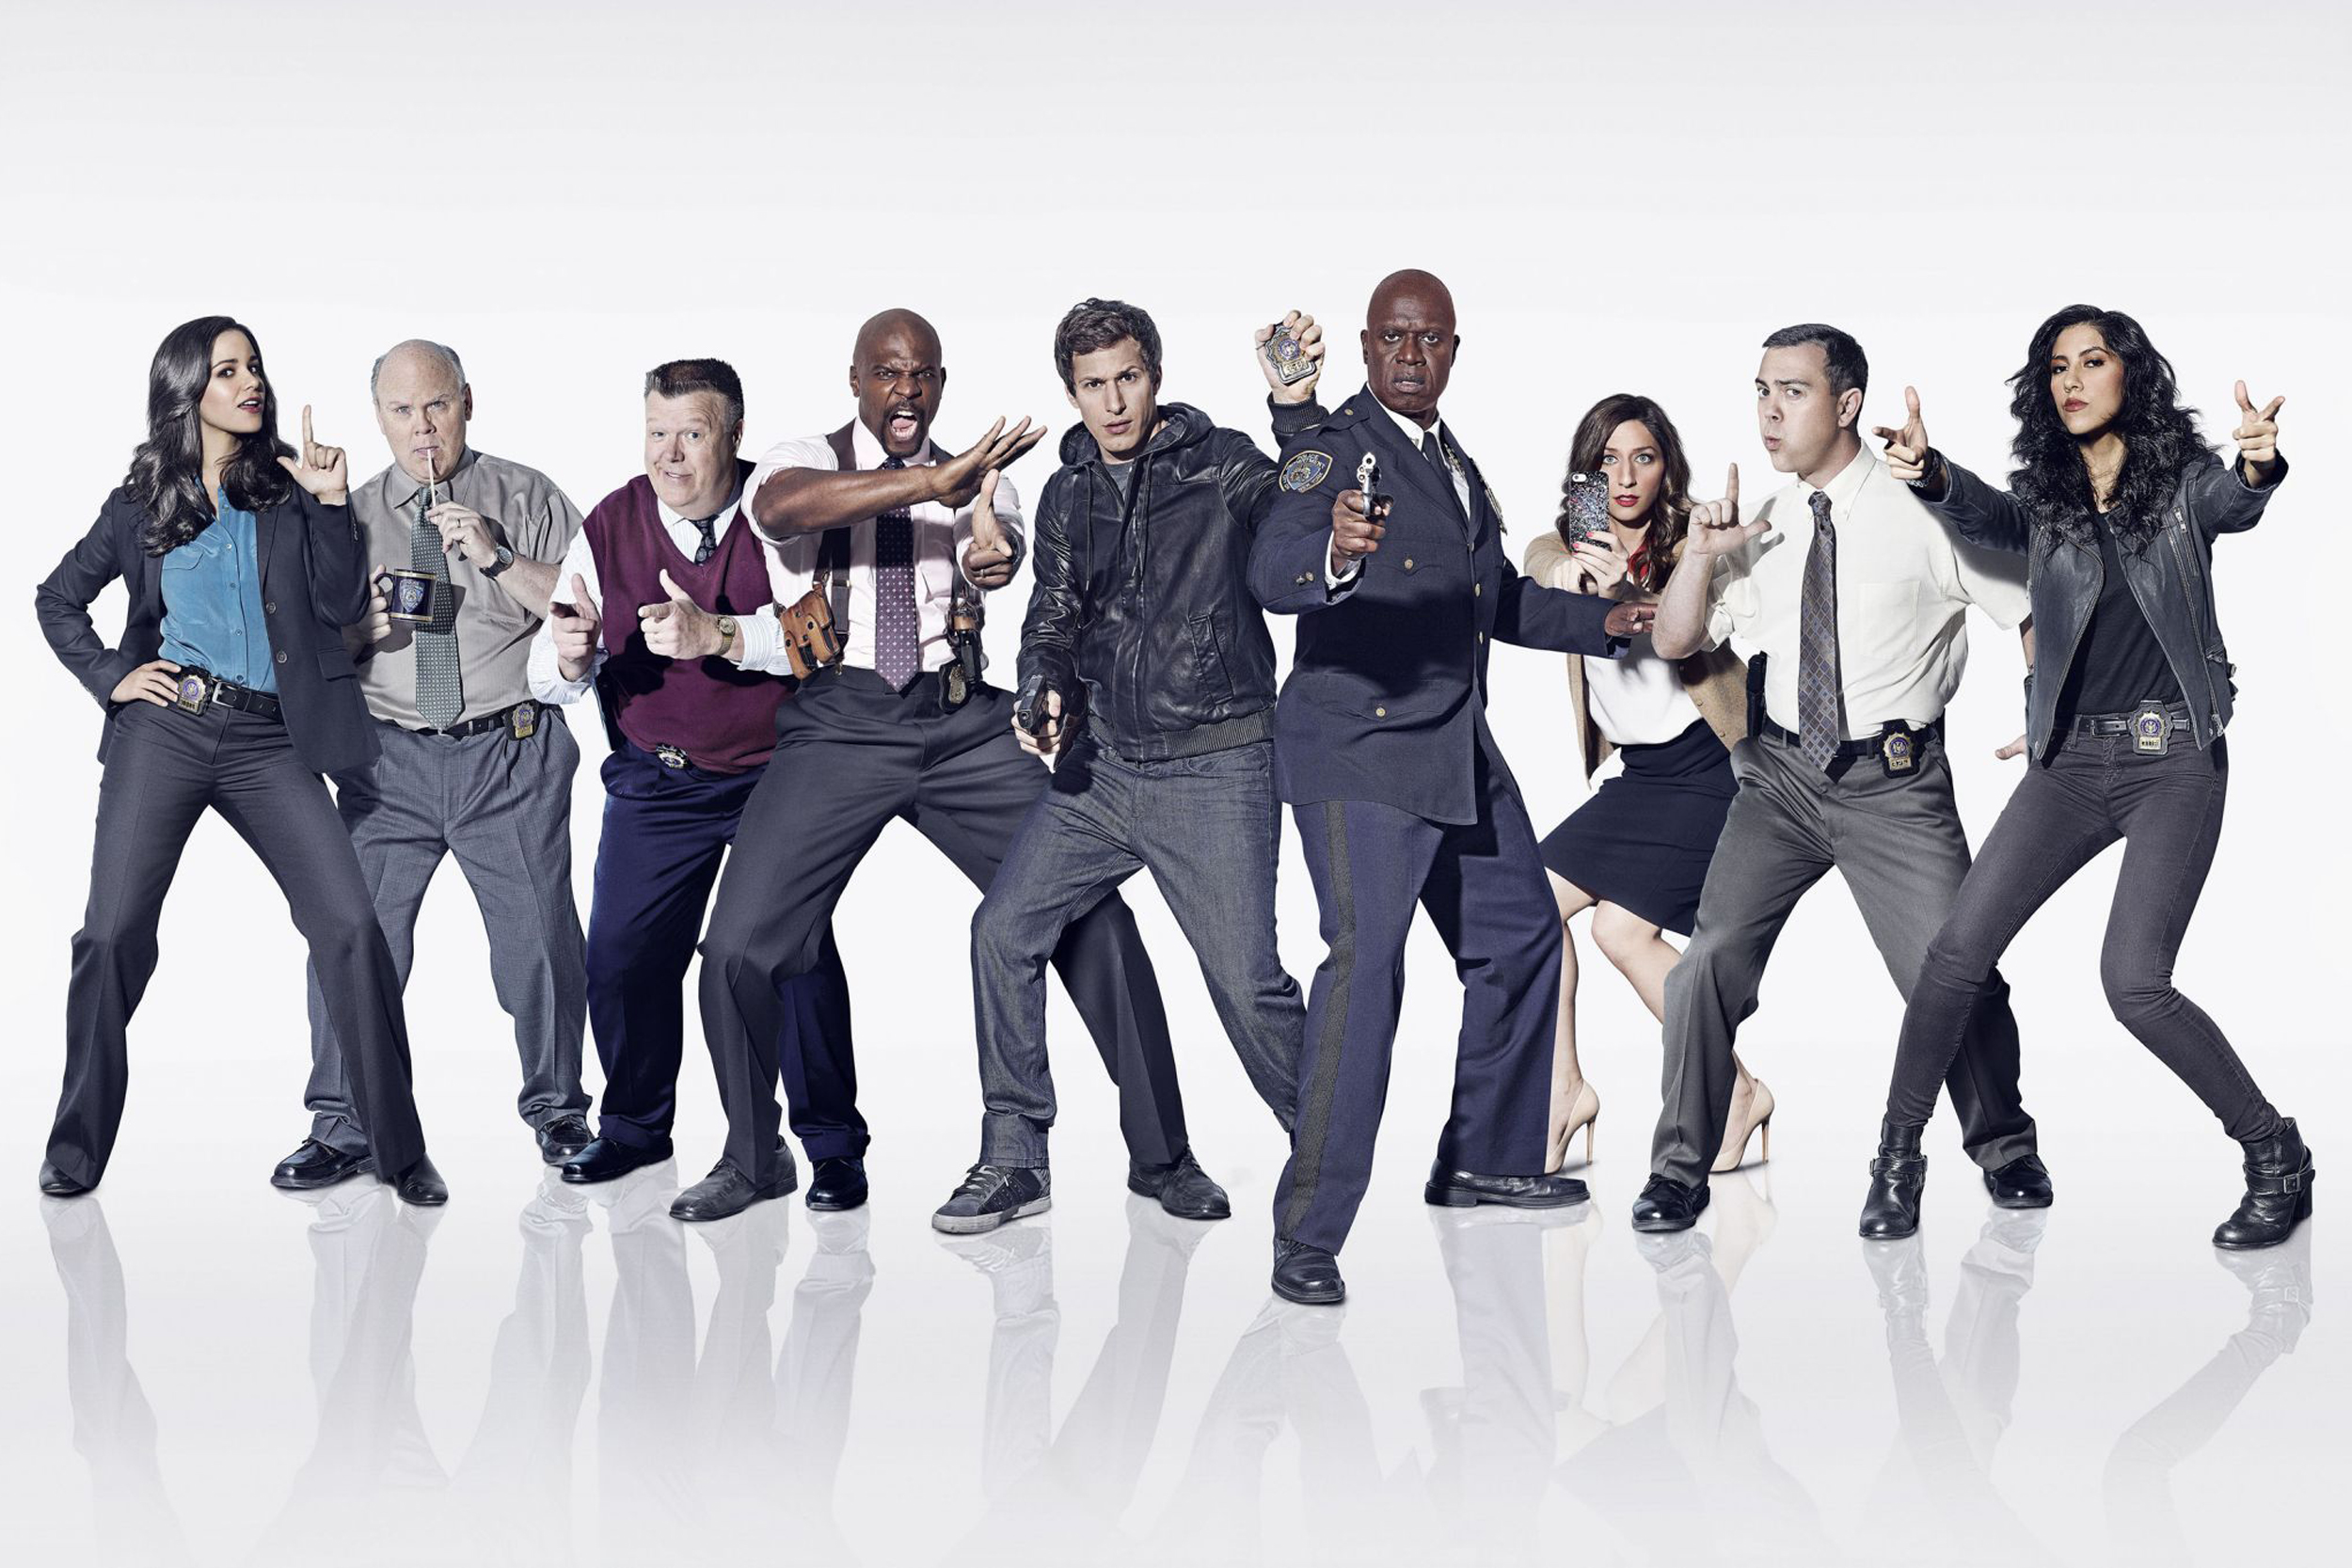 Brooklyn Nine-Nine Allows Us to Find Humor in the Police Post-Ferguson ...